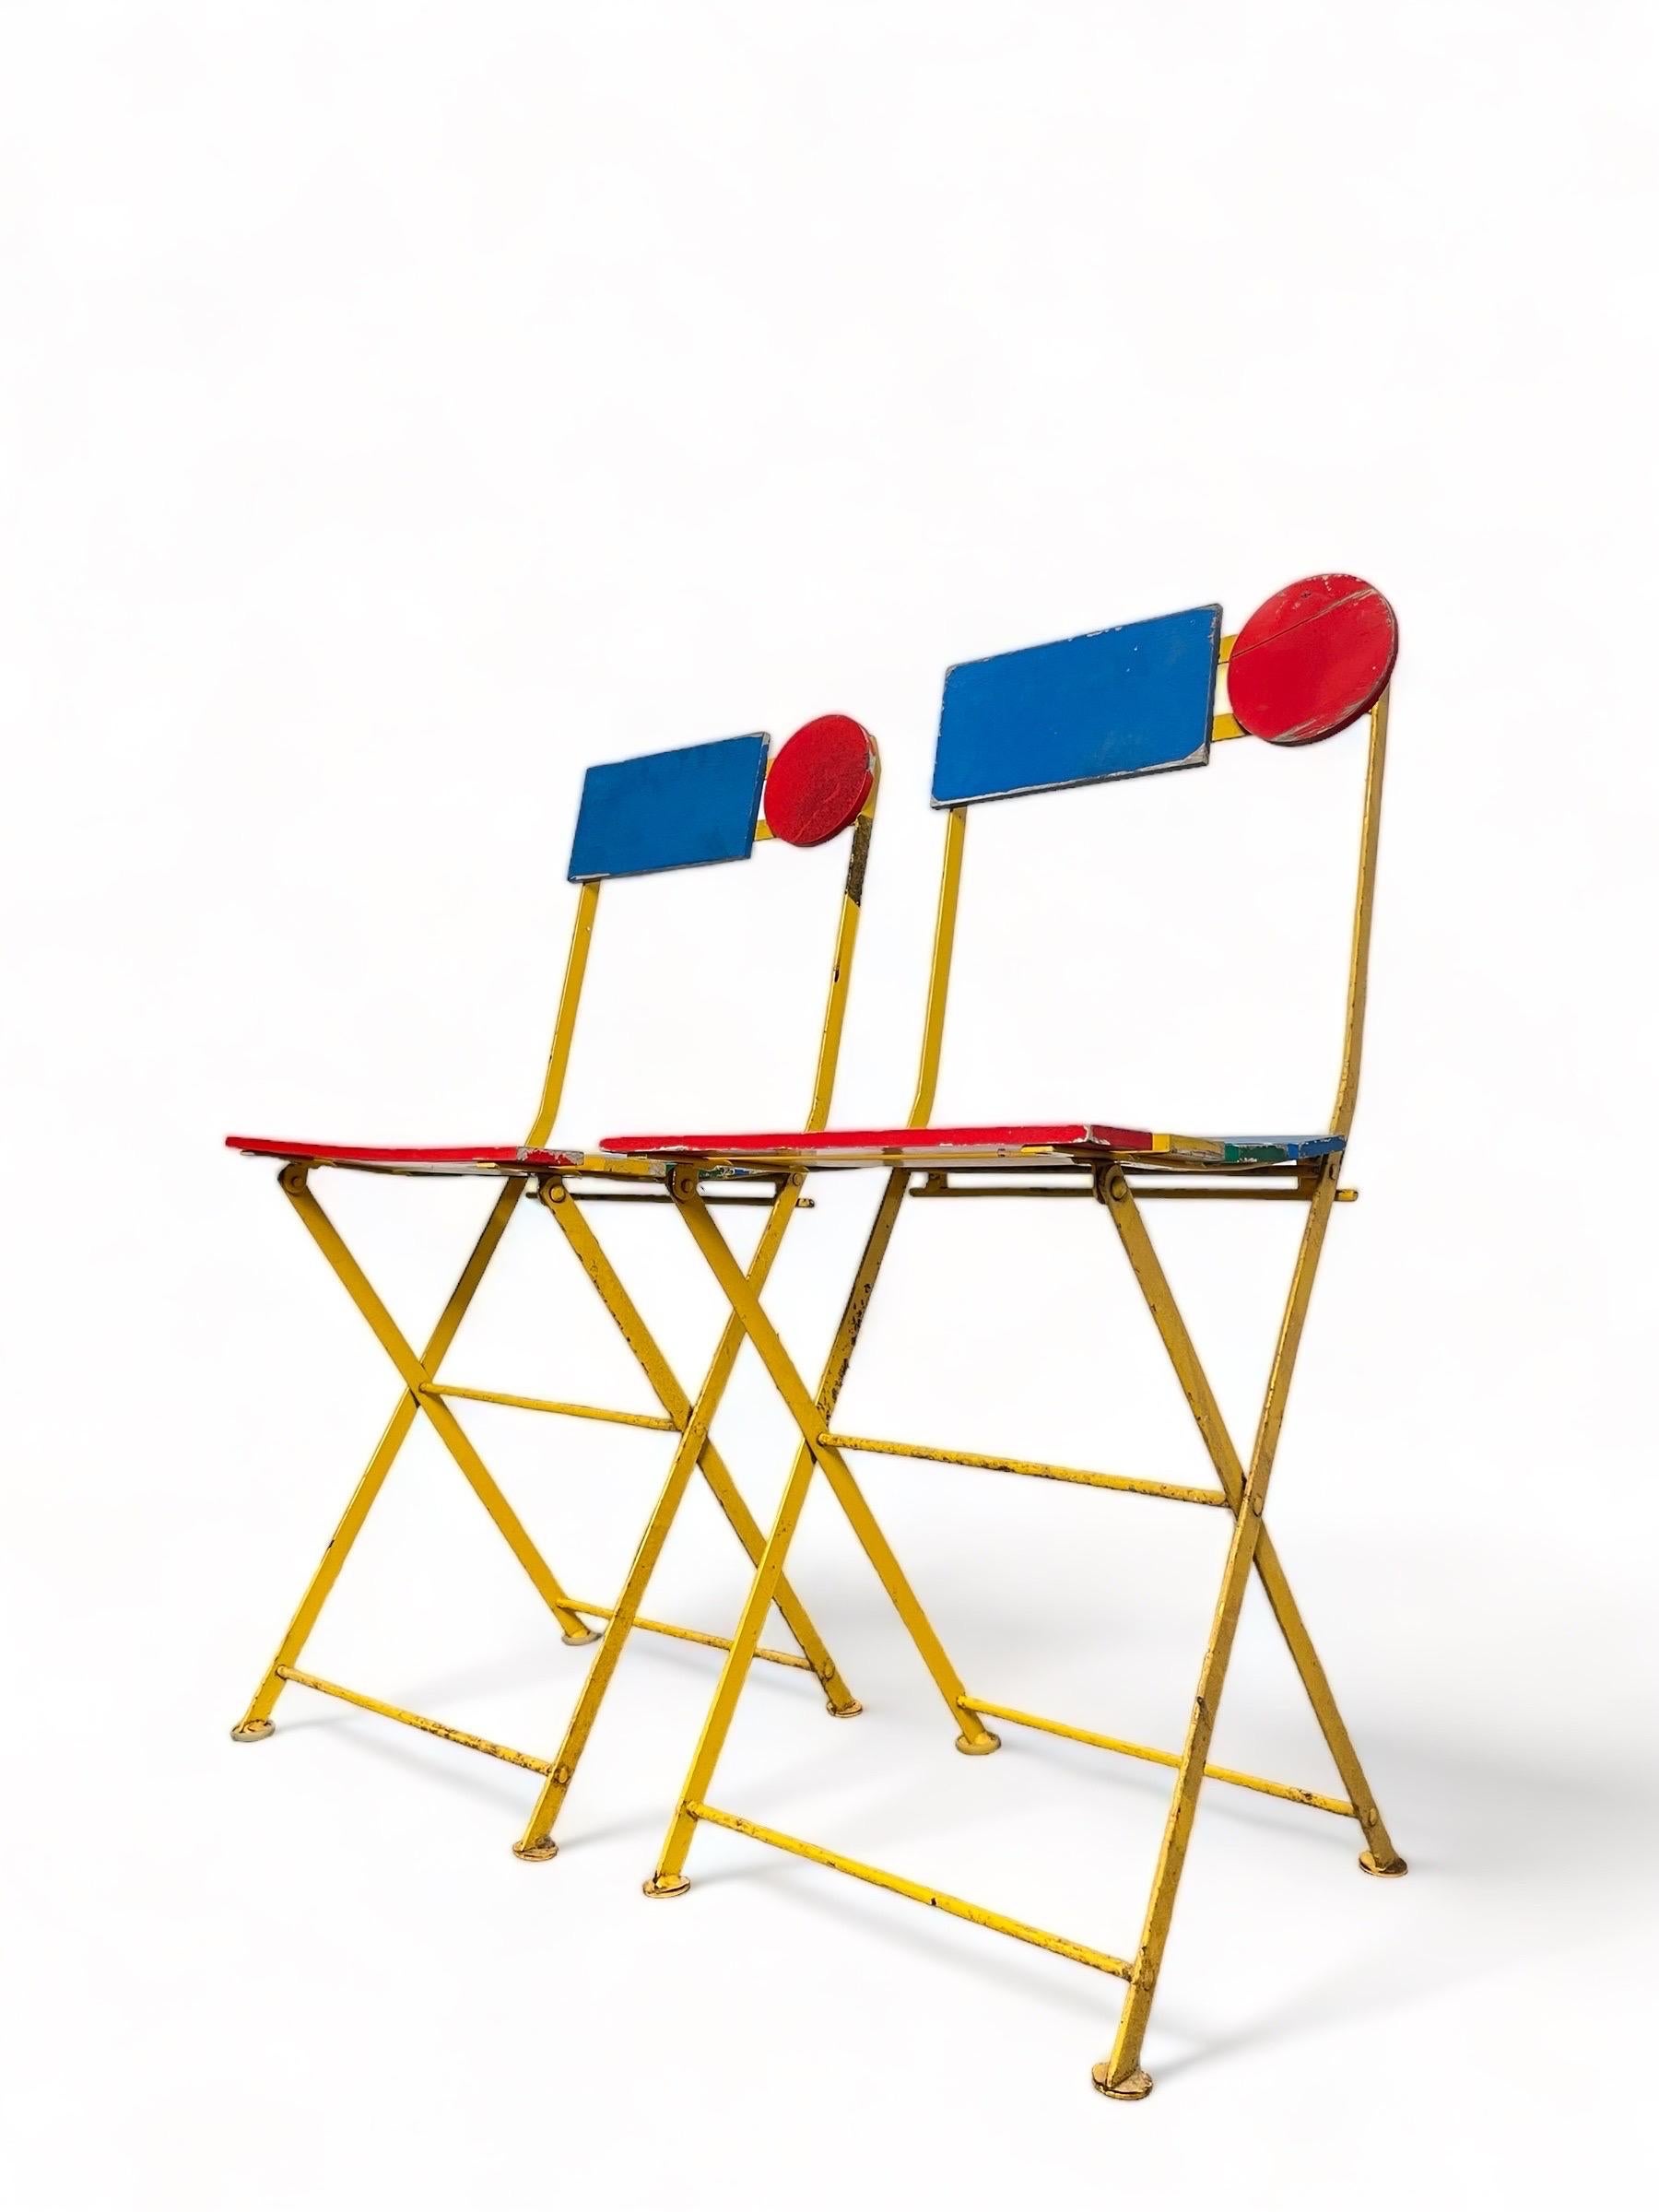 Rare Postmodern Bistro Chairs by Denis Balland For Fermob France


Folding chairs rare hard to find, Lacquered steel frame, seat and back of lacquered wood slats. Designed by Denis Balland for Fermob, France, c. 1985. Great as a side chair it is a